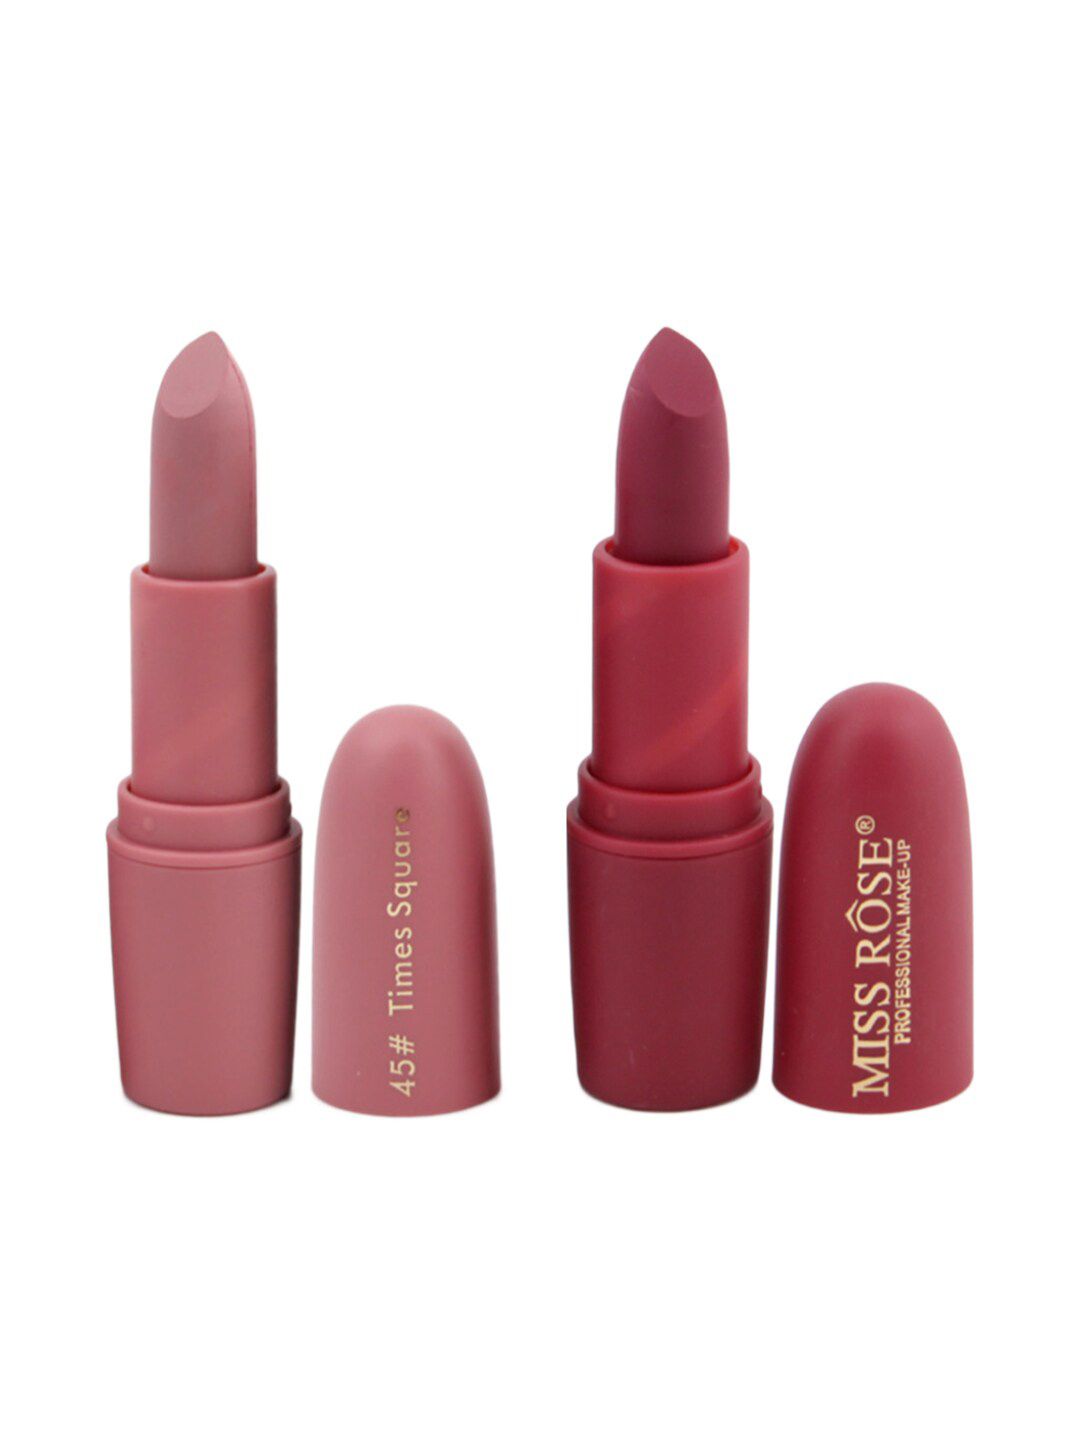 MISS ROSE Set of 2 Matte Creamy Lipsticks - Chii 49 & Times Square 45 Price in India